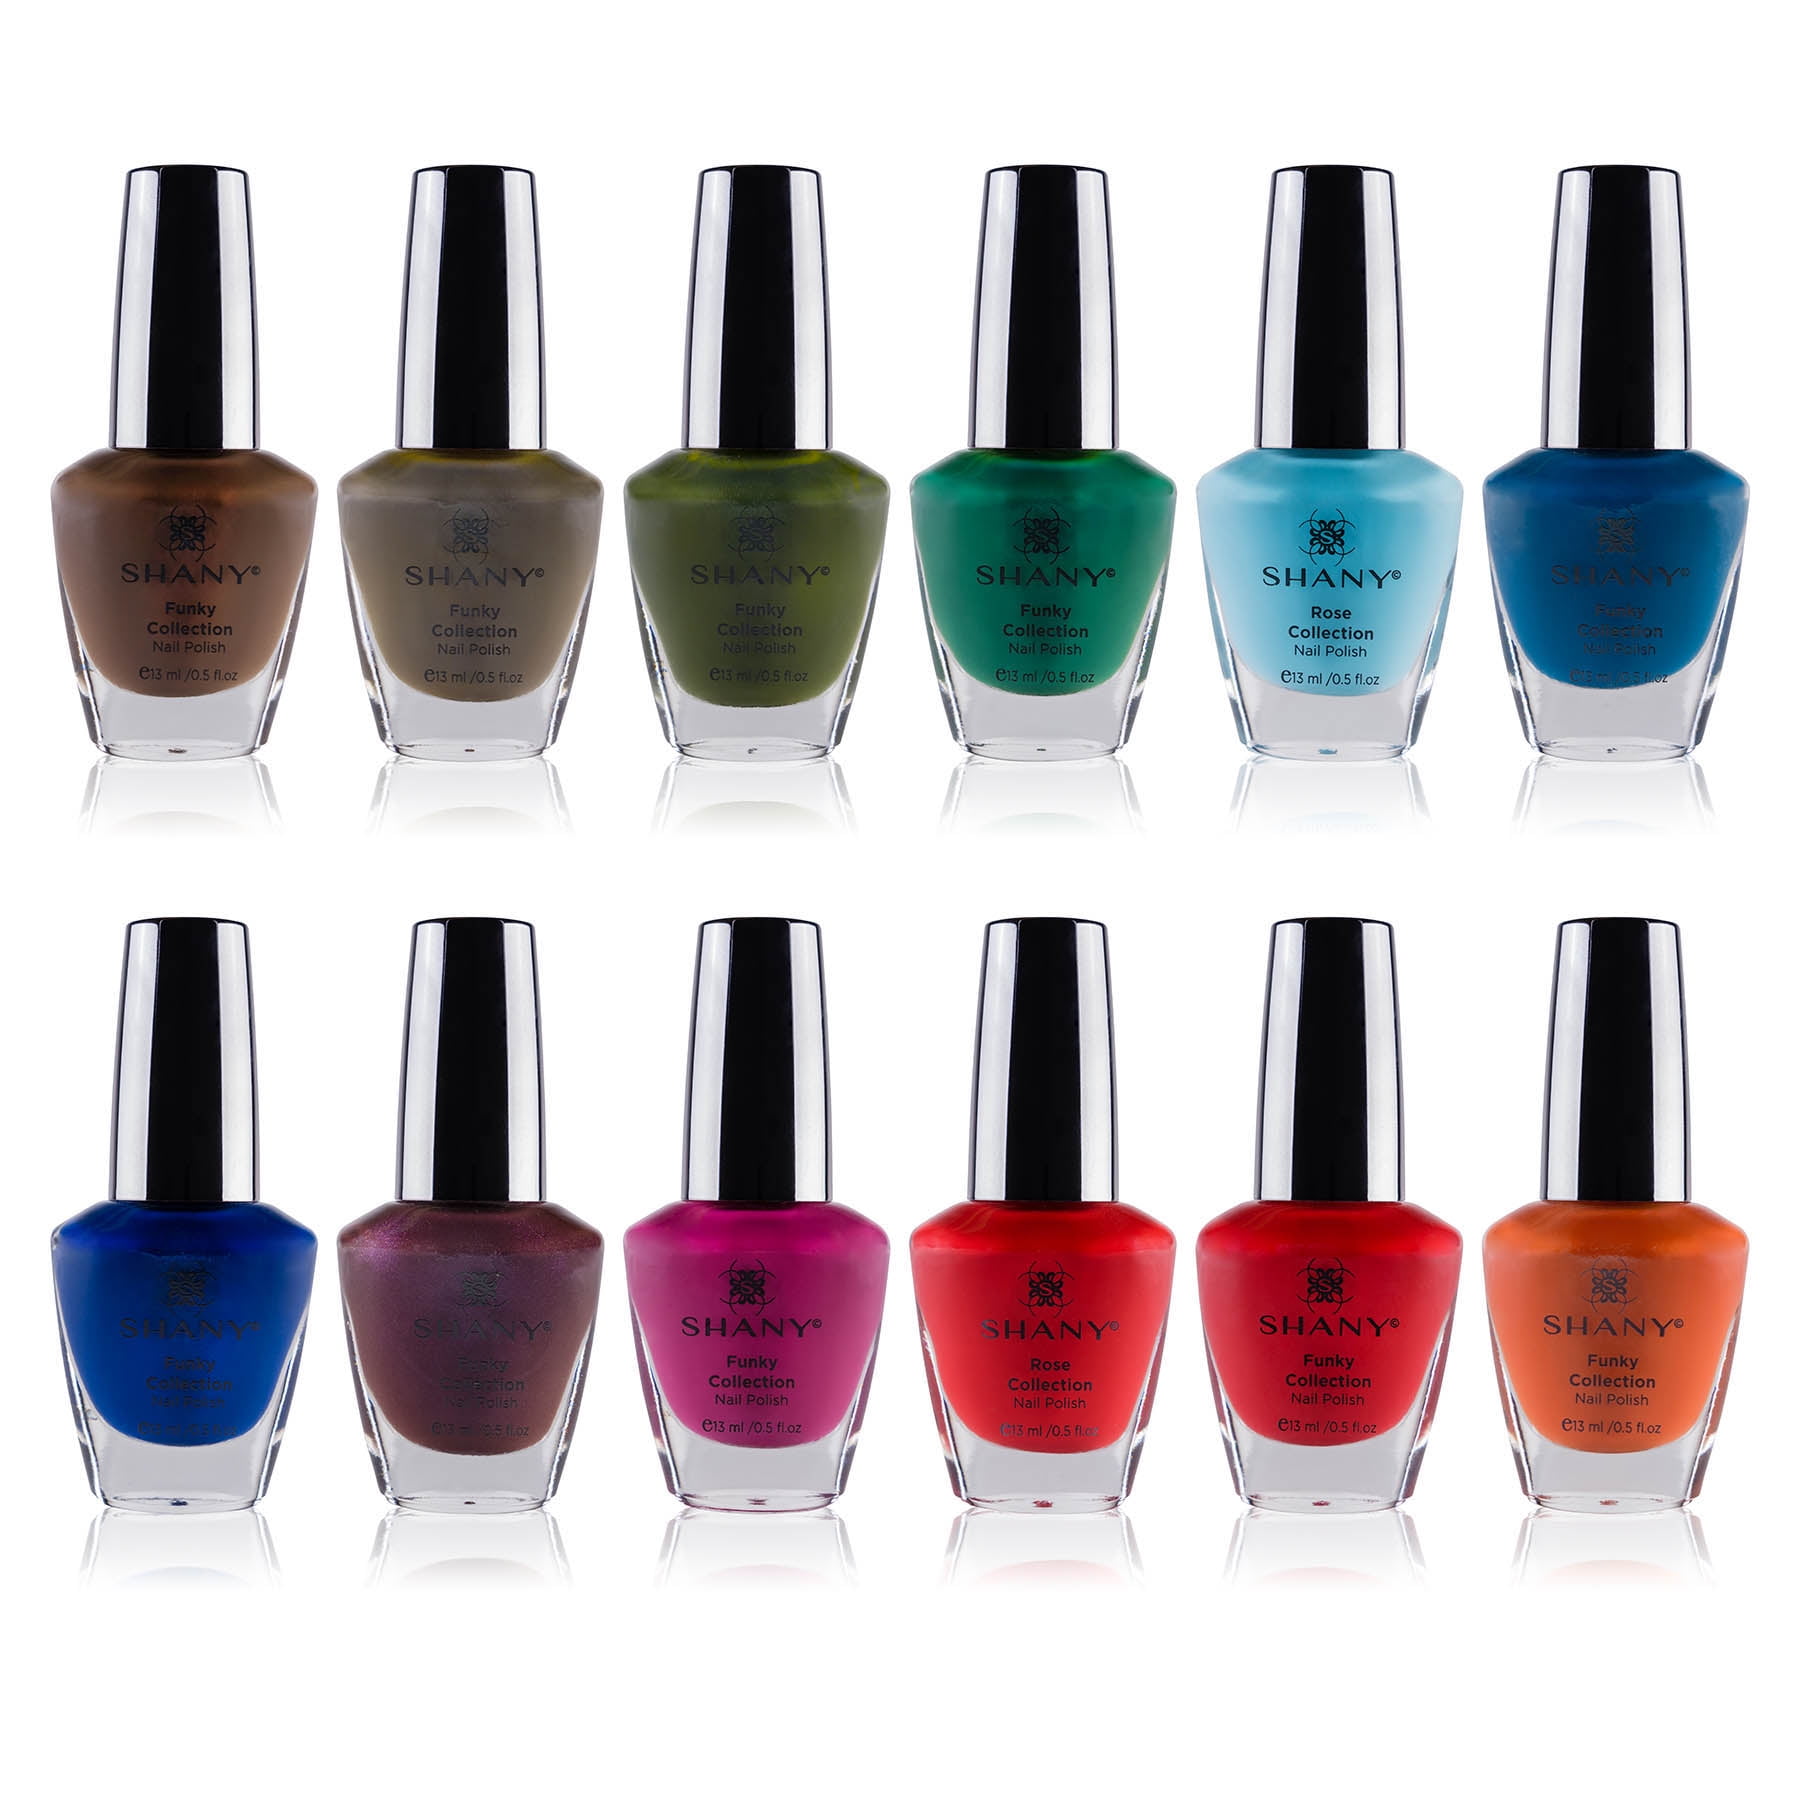 SHANY Cosmetics Nail Polish Set - 12 Spring Inspired Shades in Gorgeous  Semi Glossy and Shimmery Finishes - Pastel Collection 